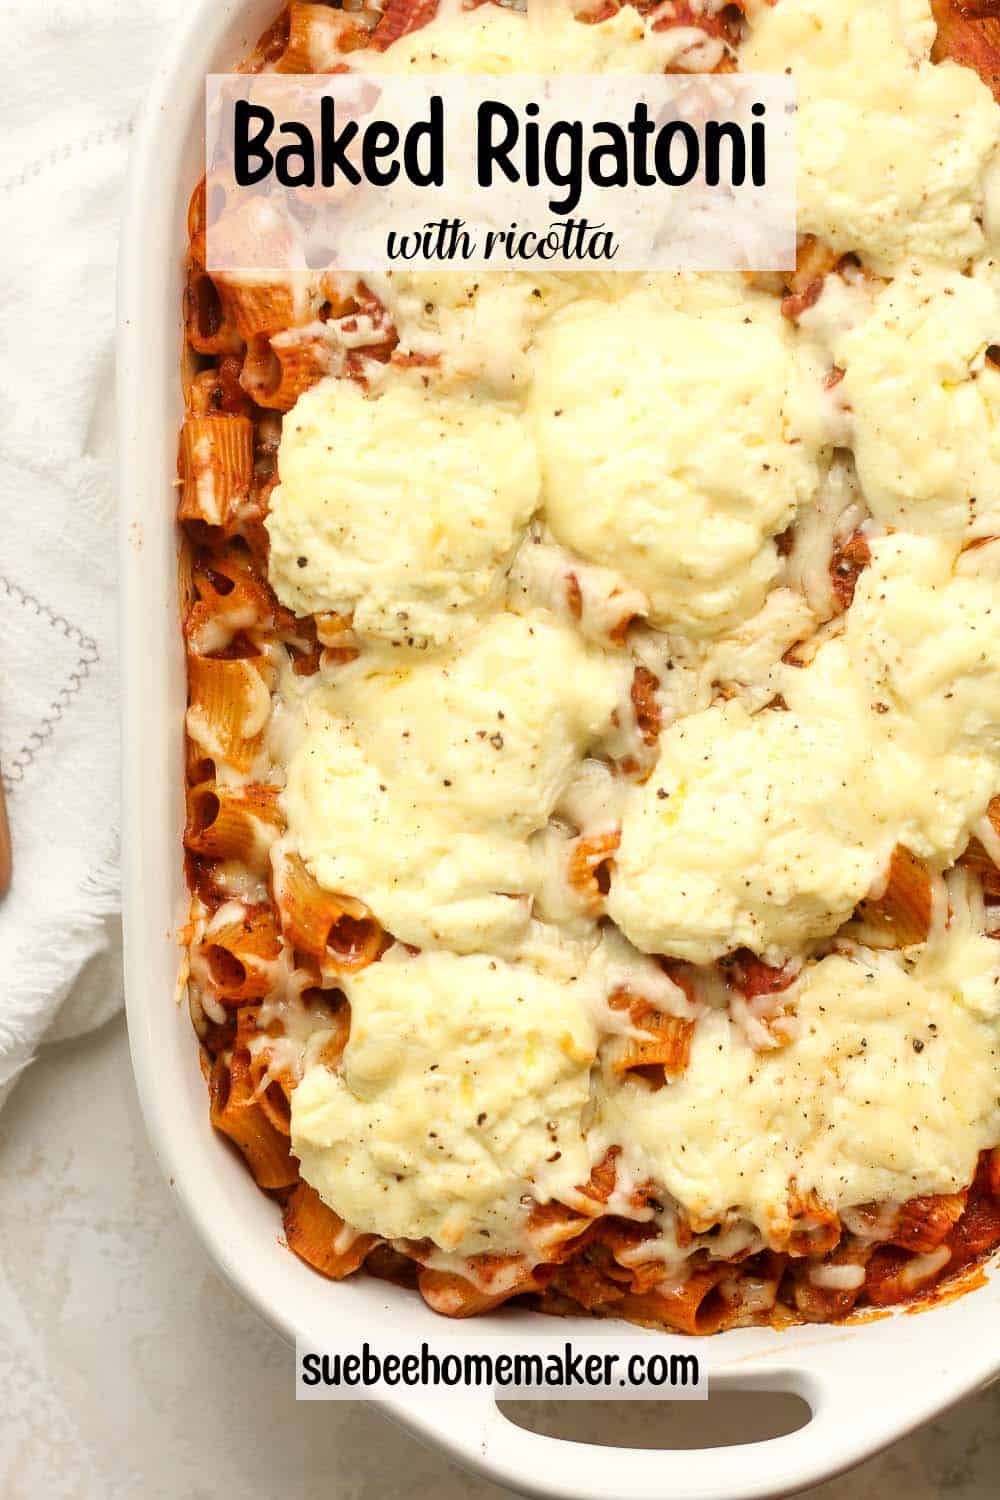 A casserole of baked rigatoni with ricotta.